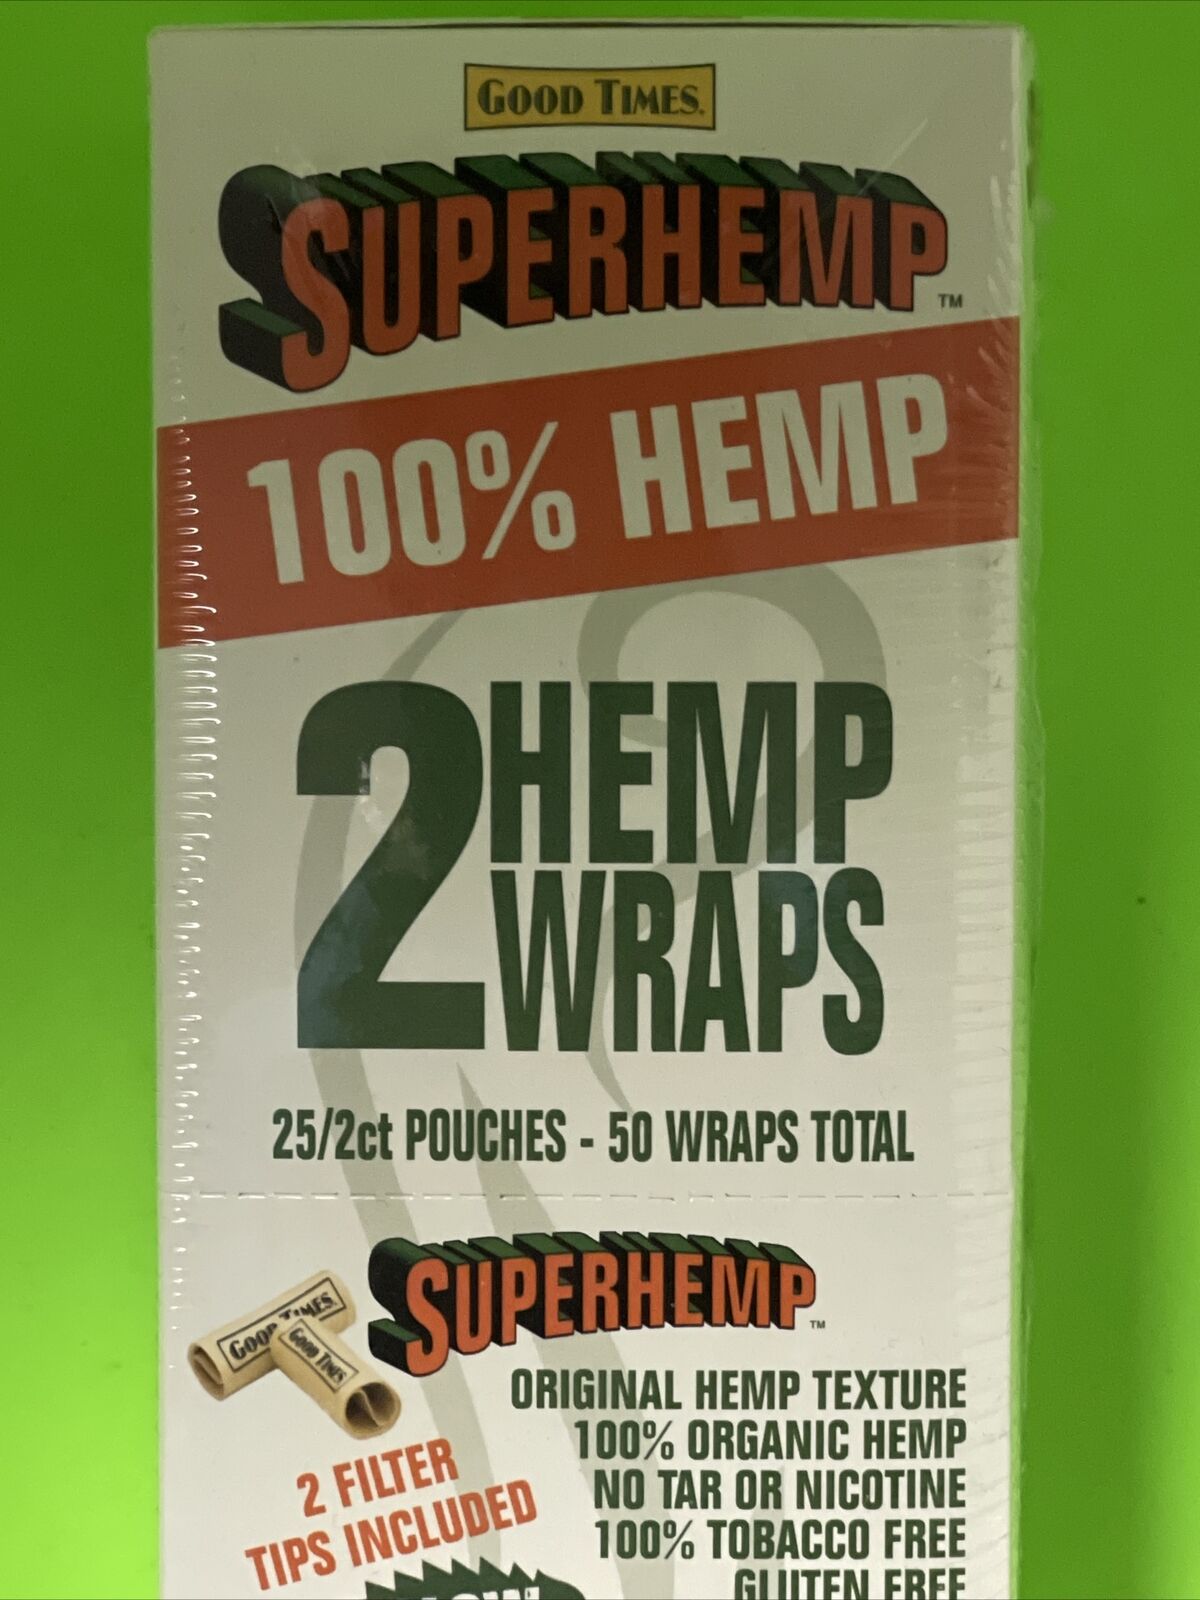 FREE GIFTS🎁Good😊Times👍SuperHemp 50 Super High Quality Hemp🍁Rolling🔥Papers💨